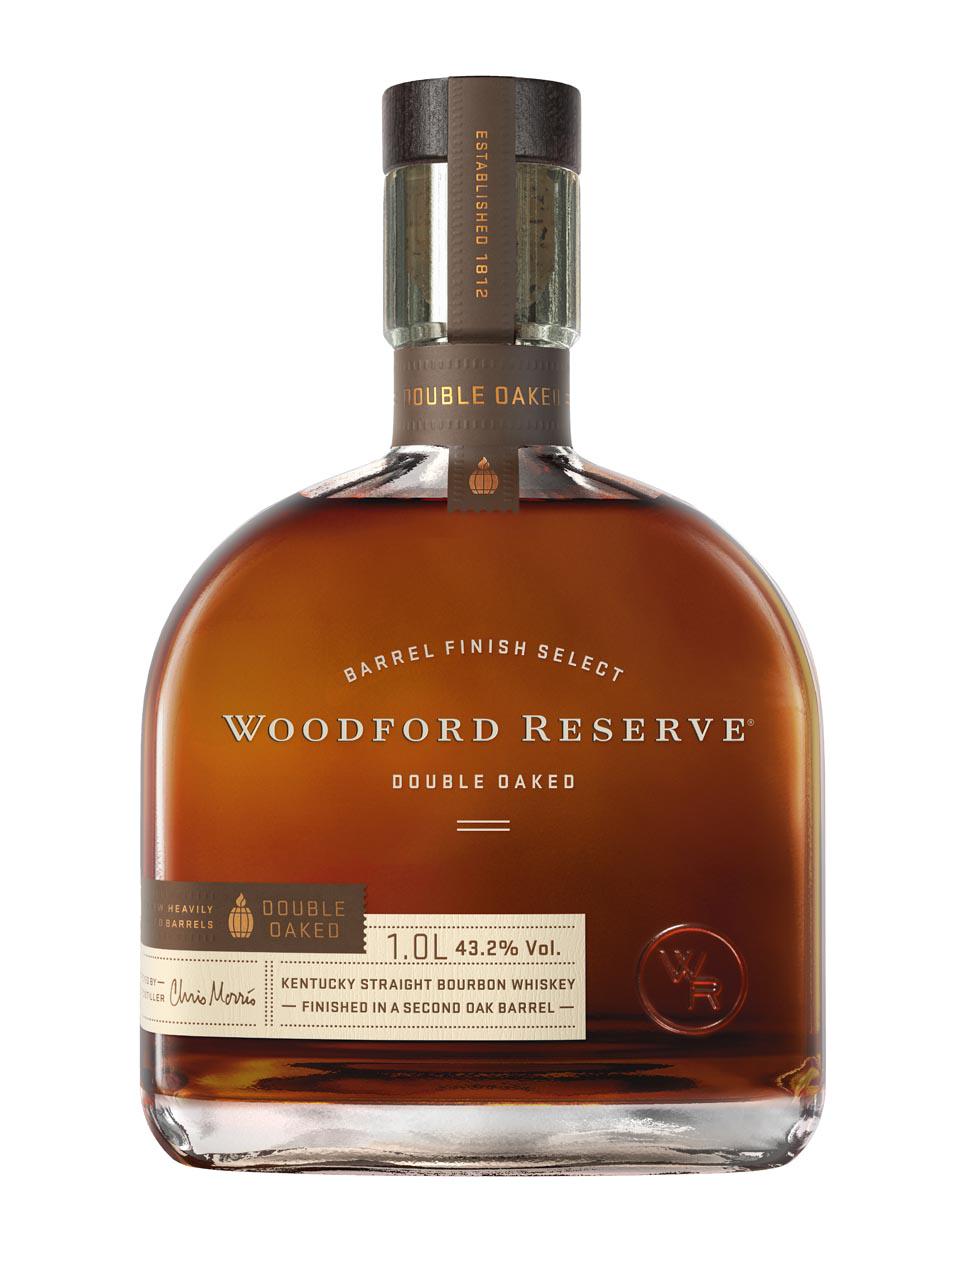 Online 43.2% Straight Double Bourbon Reserve Shopping Kentucky Woodford Frankfurt 1L* Airport Whiskey Oaked |